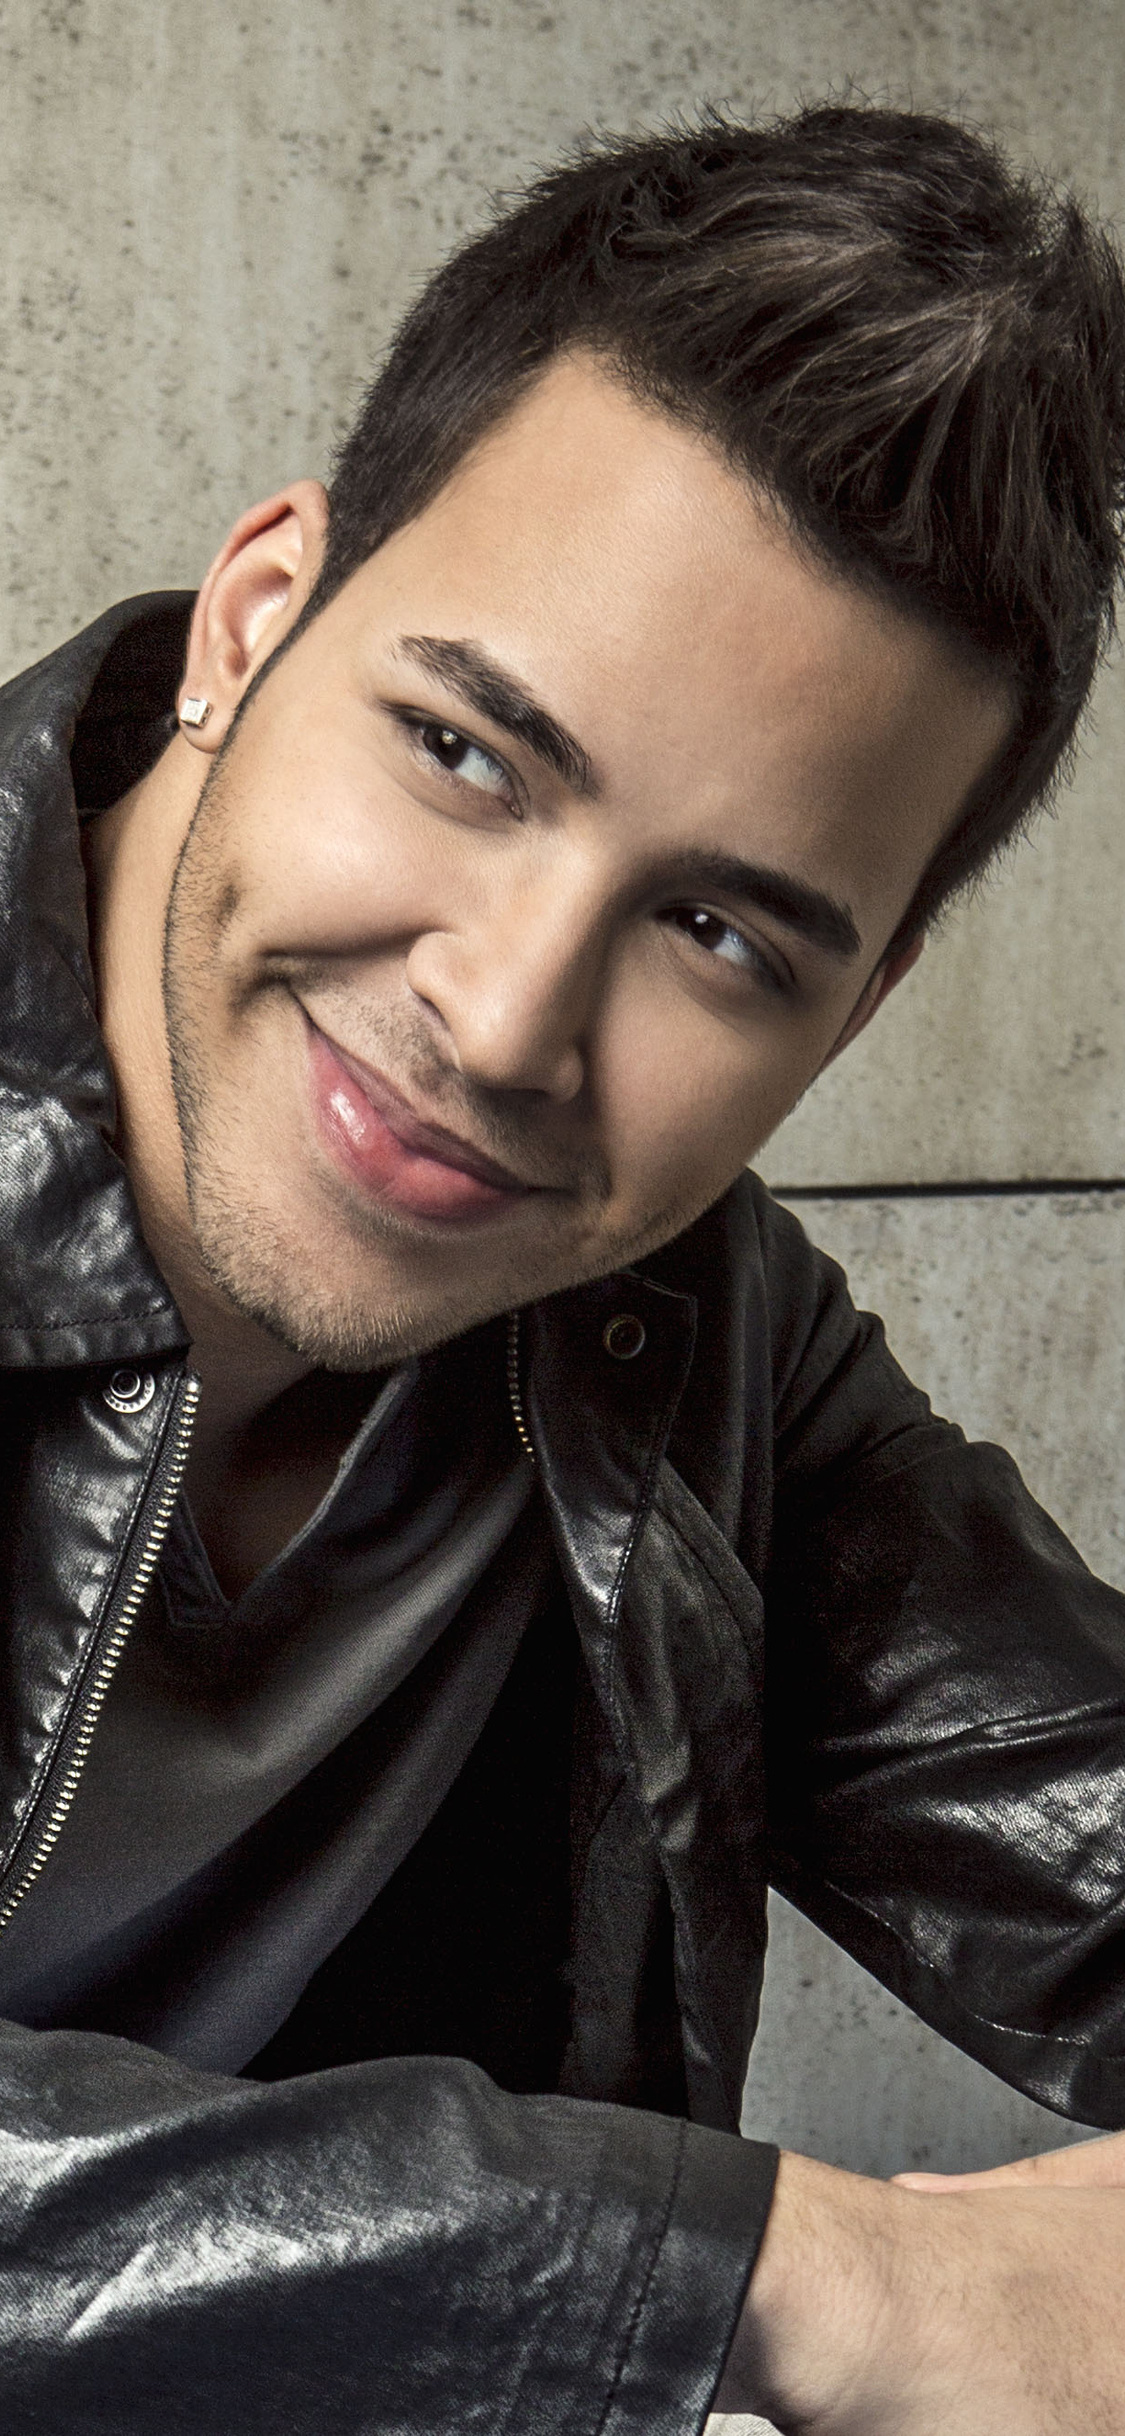 Prince Royce, iPhone wallpaper, HD 4K images, Music icon, 1130x2440 HD Phone